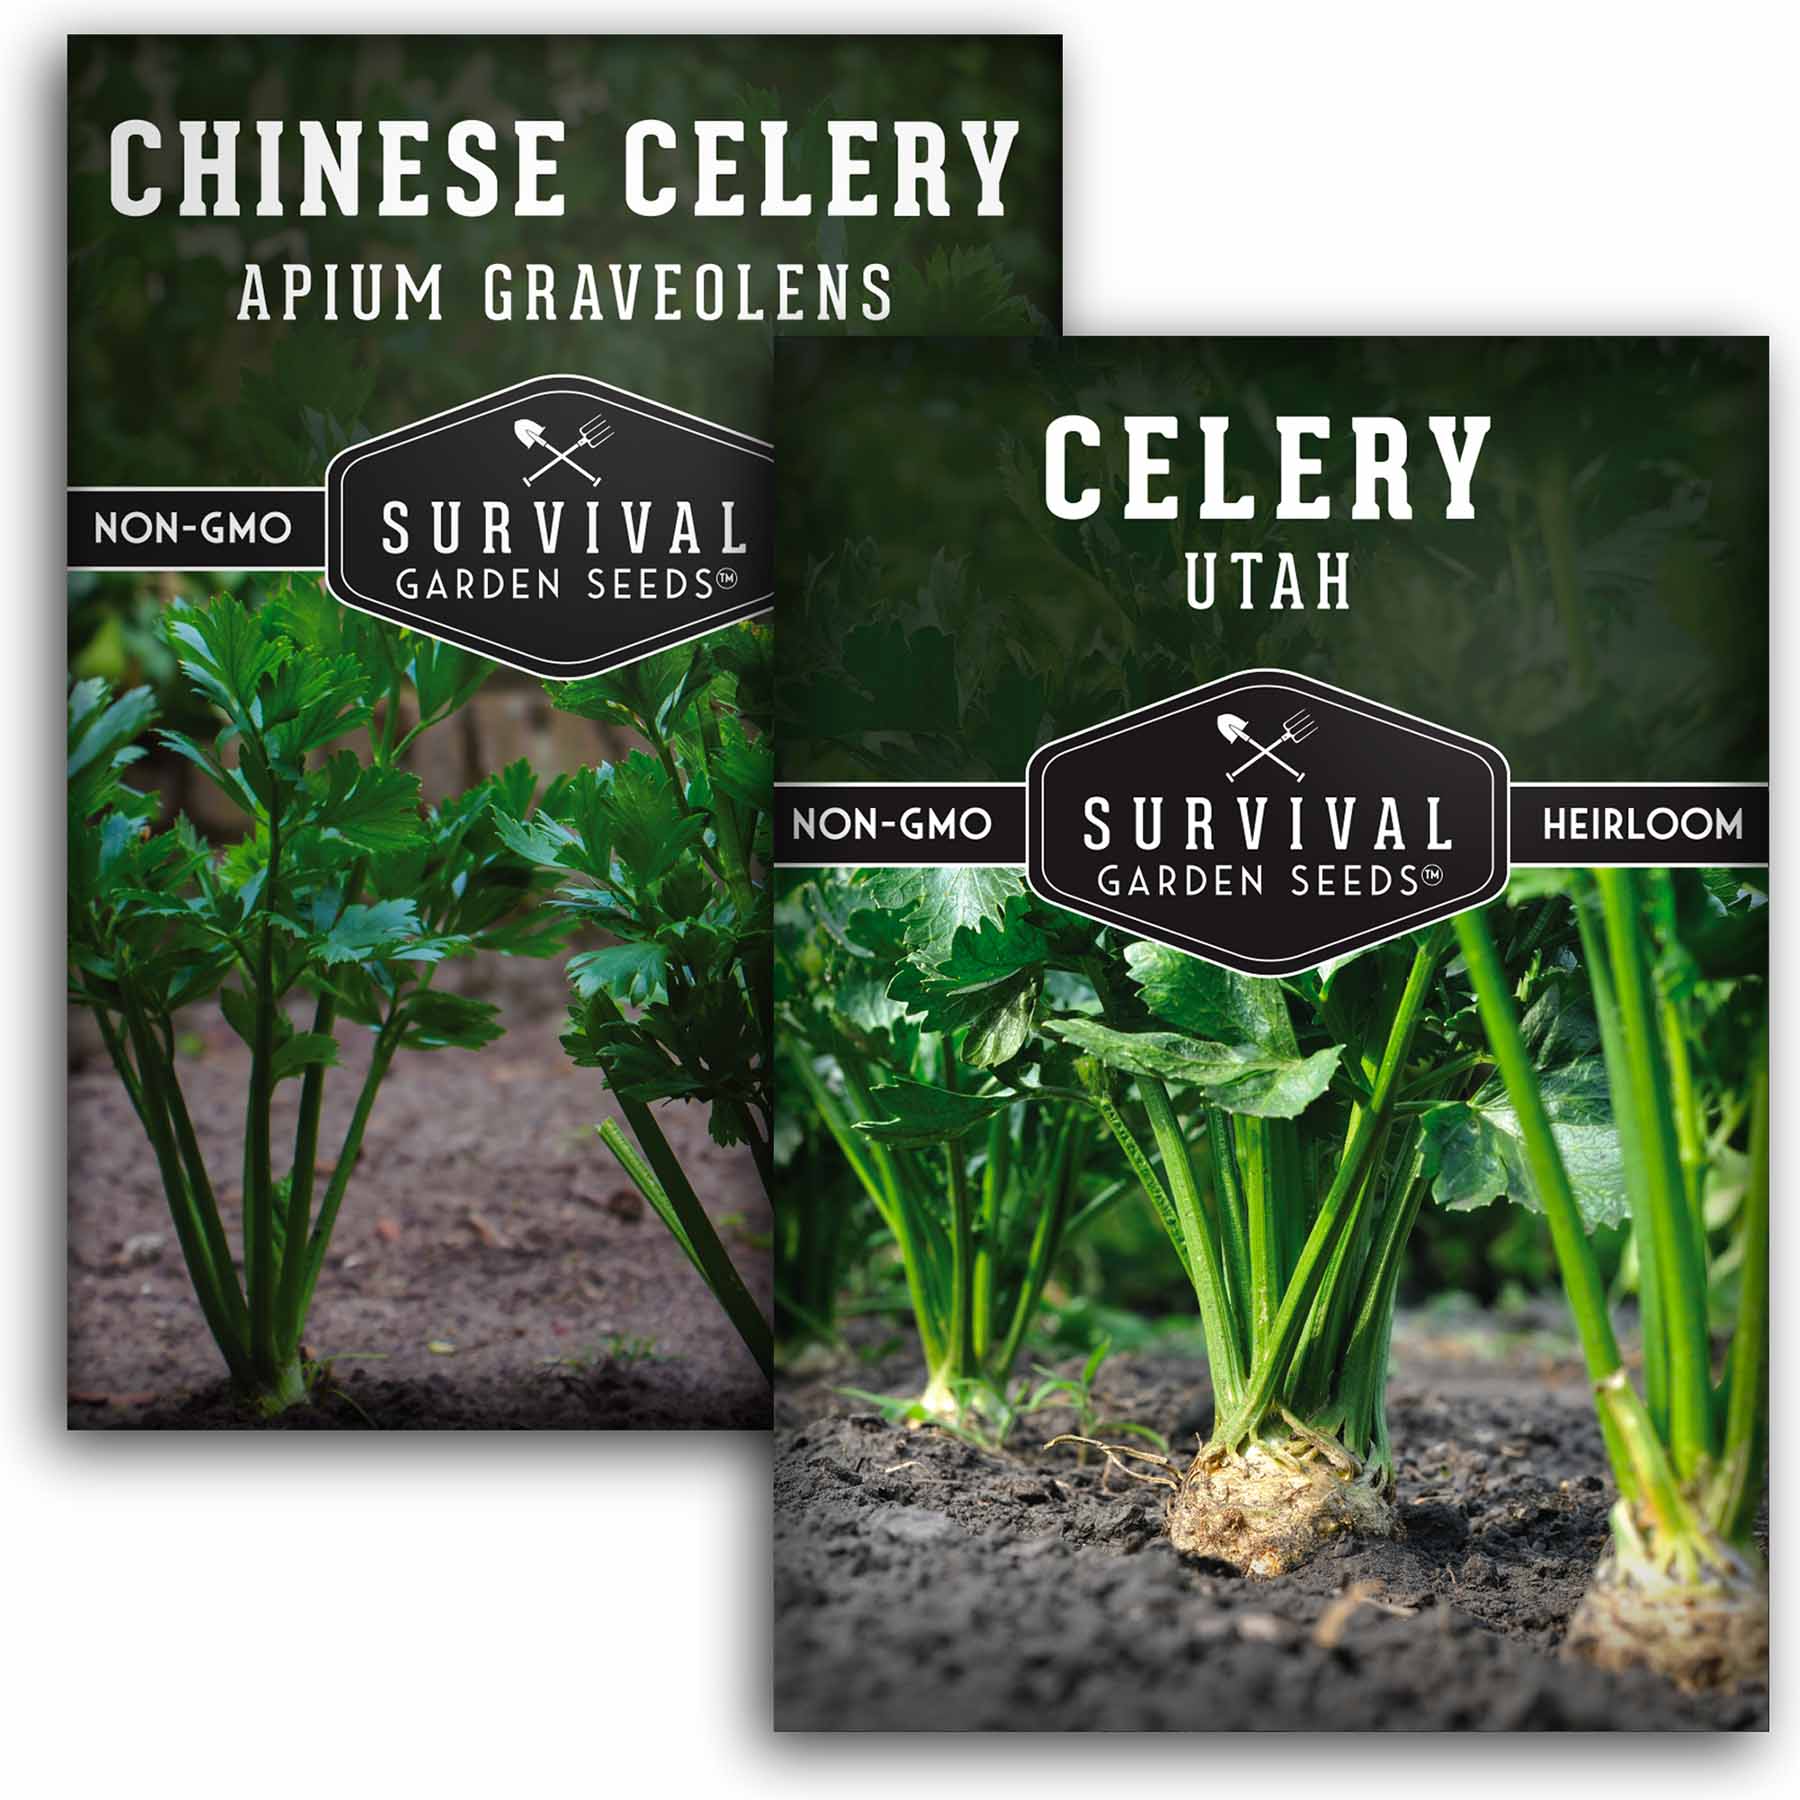 Celery Collection - 2 packets of celery seeds for planting